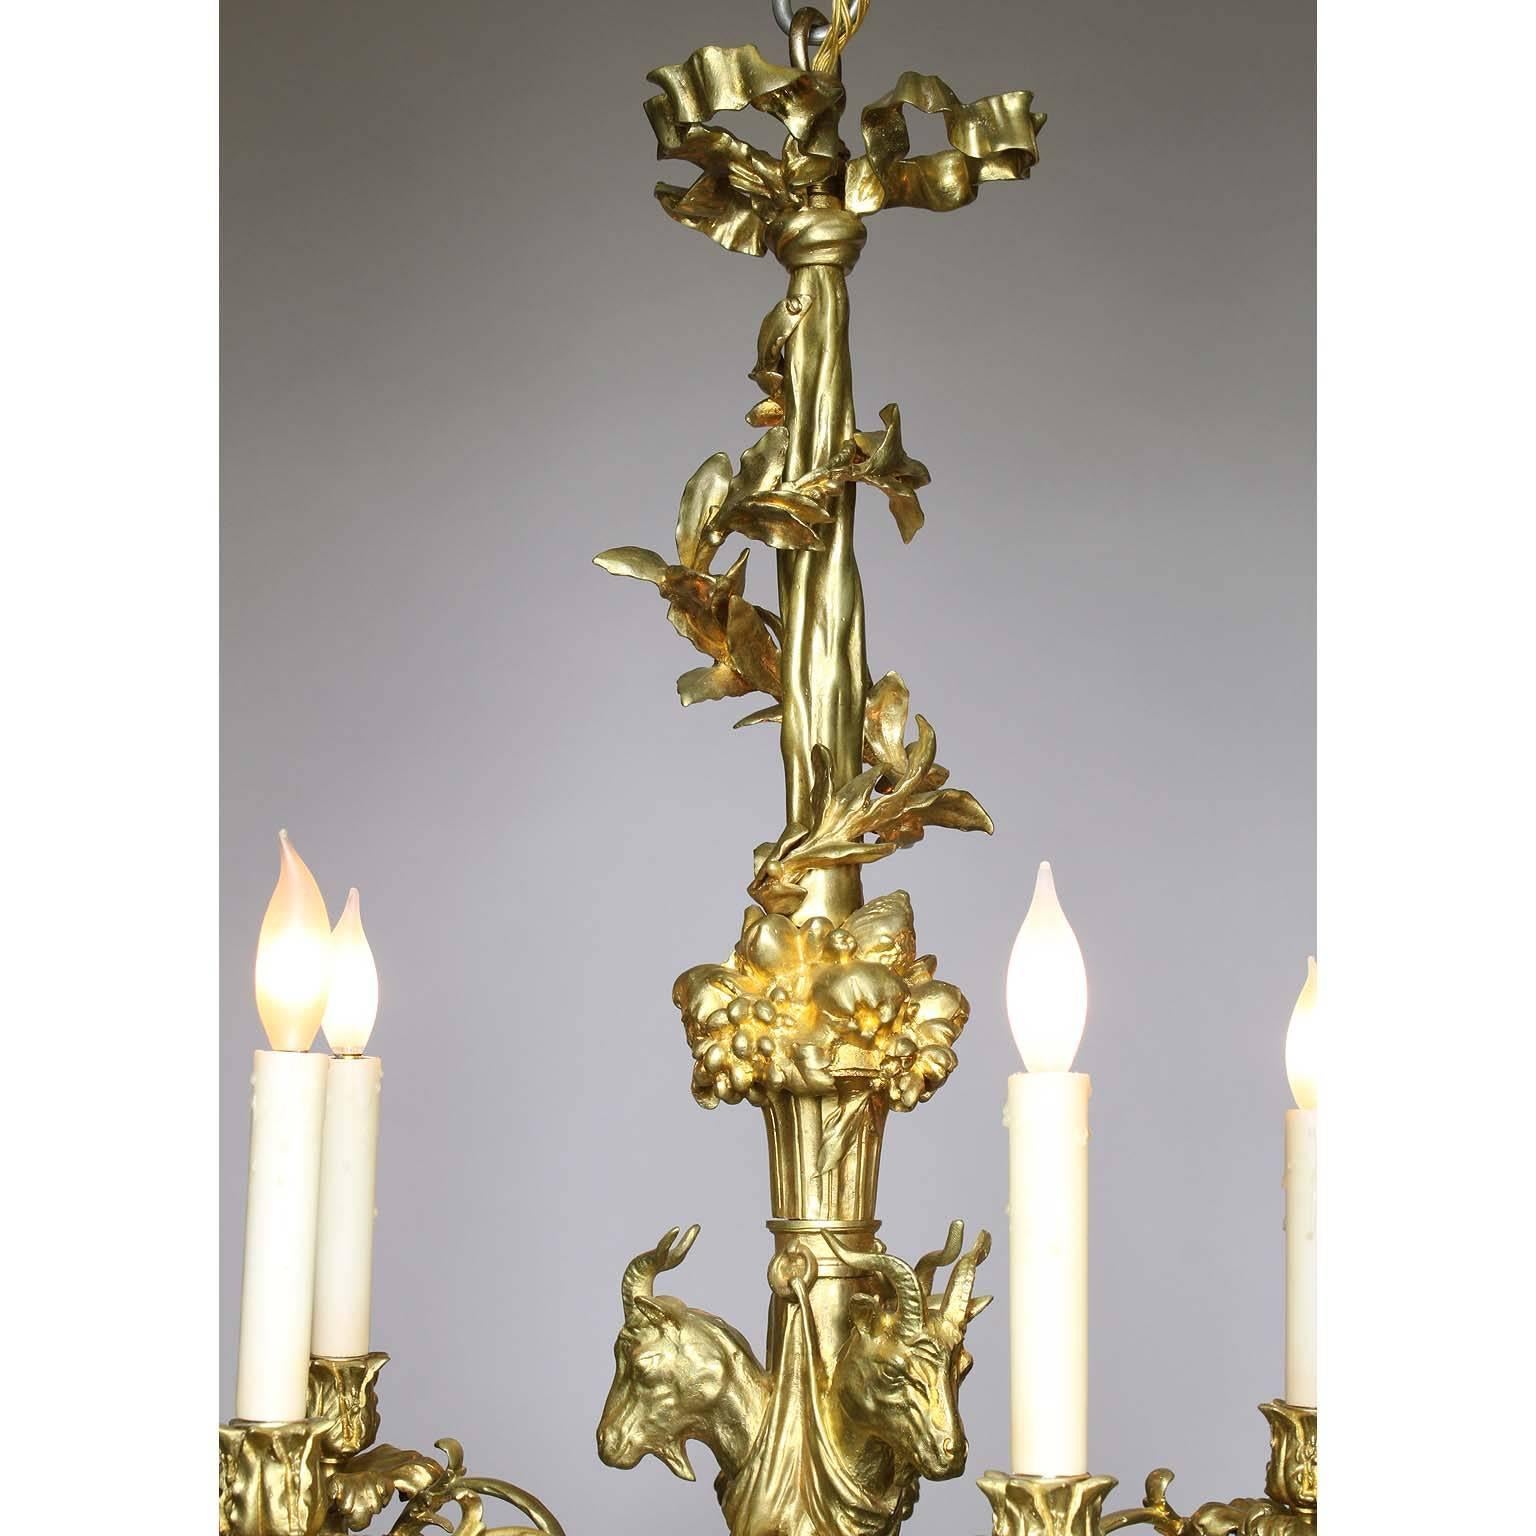 A French 19th century Louis XV style gilt bronze six-light figural chandelier. The elongated gilt bronze frame with six scrolled candle-arms (now electrified) surmounted with ribbons, vines, three ram-heads, rosettes, fruits, tassels and ending with